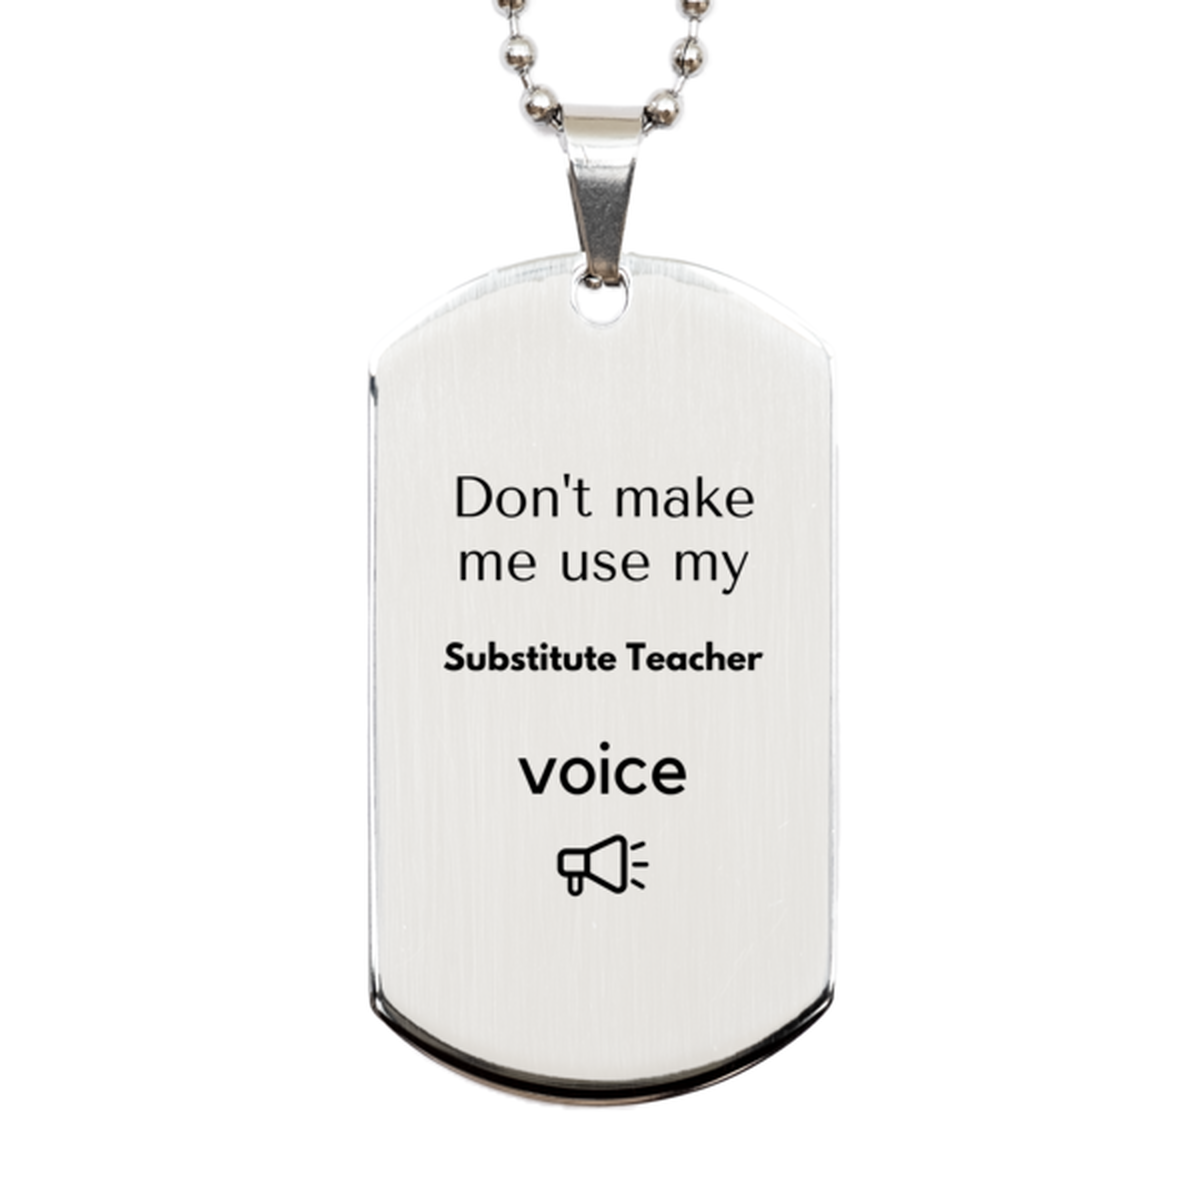 Don't make me use my Substitute Teacher voice, Sarcasm Substitute Teacher Gifts, Christmas Substitute Teacher Silver Dog Tag Birthday Unique Gifts For Substitute Teacher Coworkers, Men, Women, Colleague, Friends